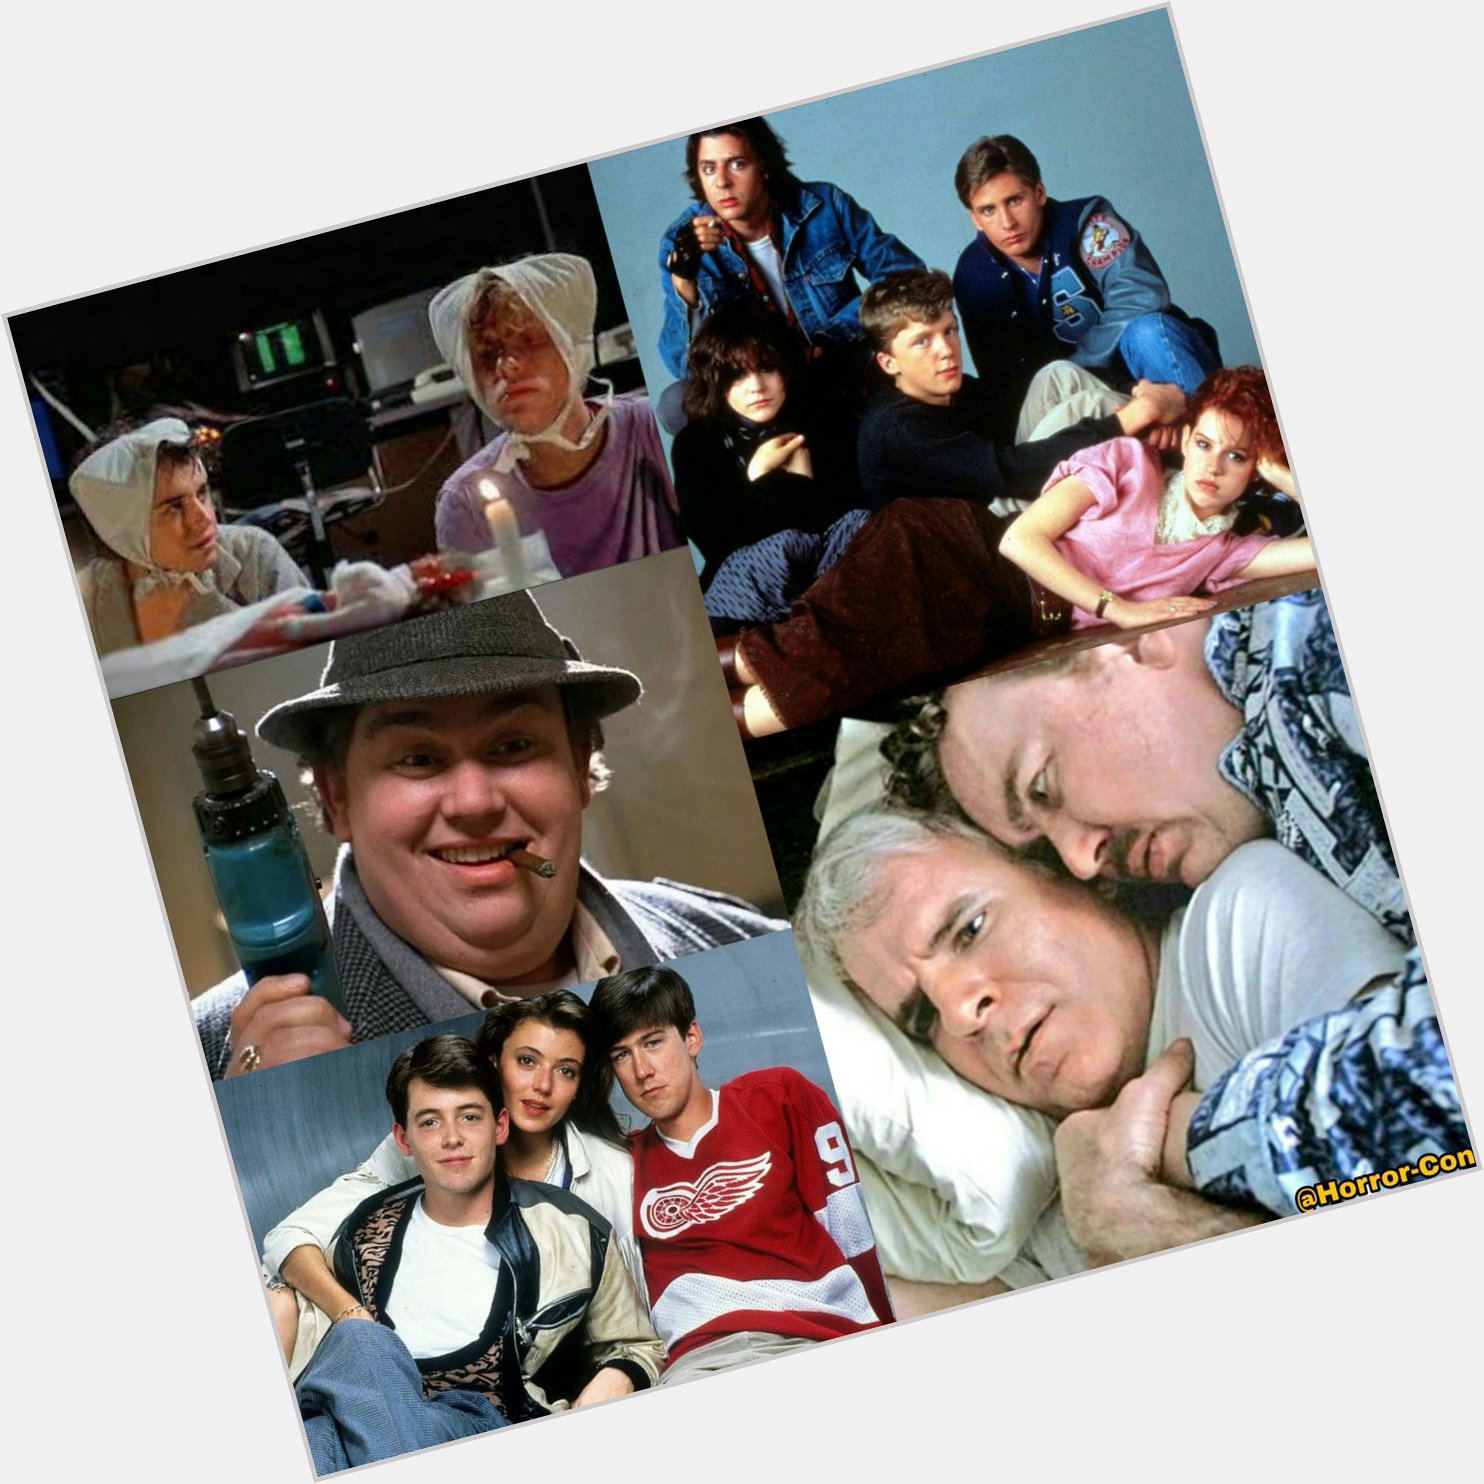 Happy Birthday to the late great John Hughes! (February 18, 1950 August 6, 2009) 